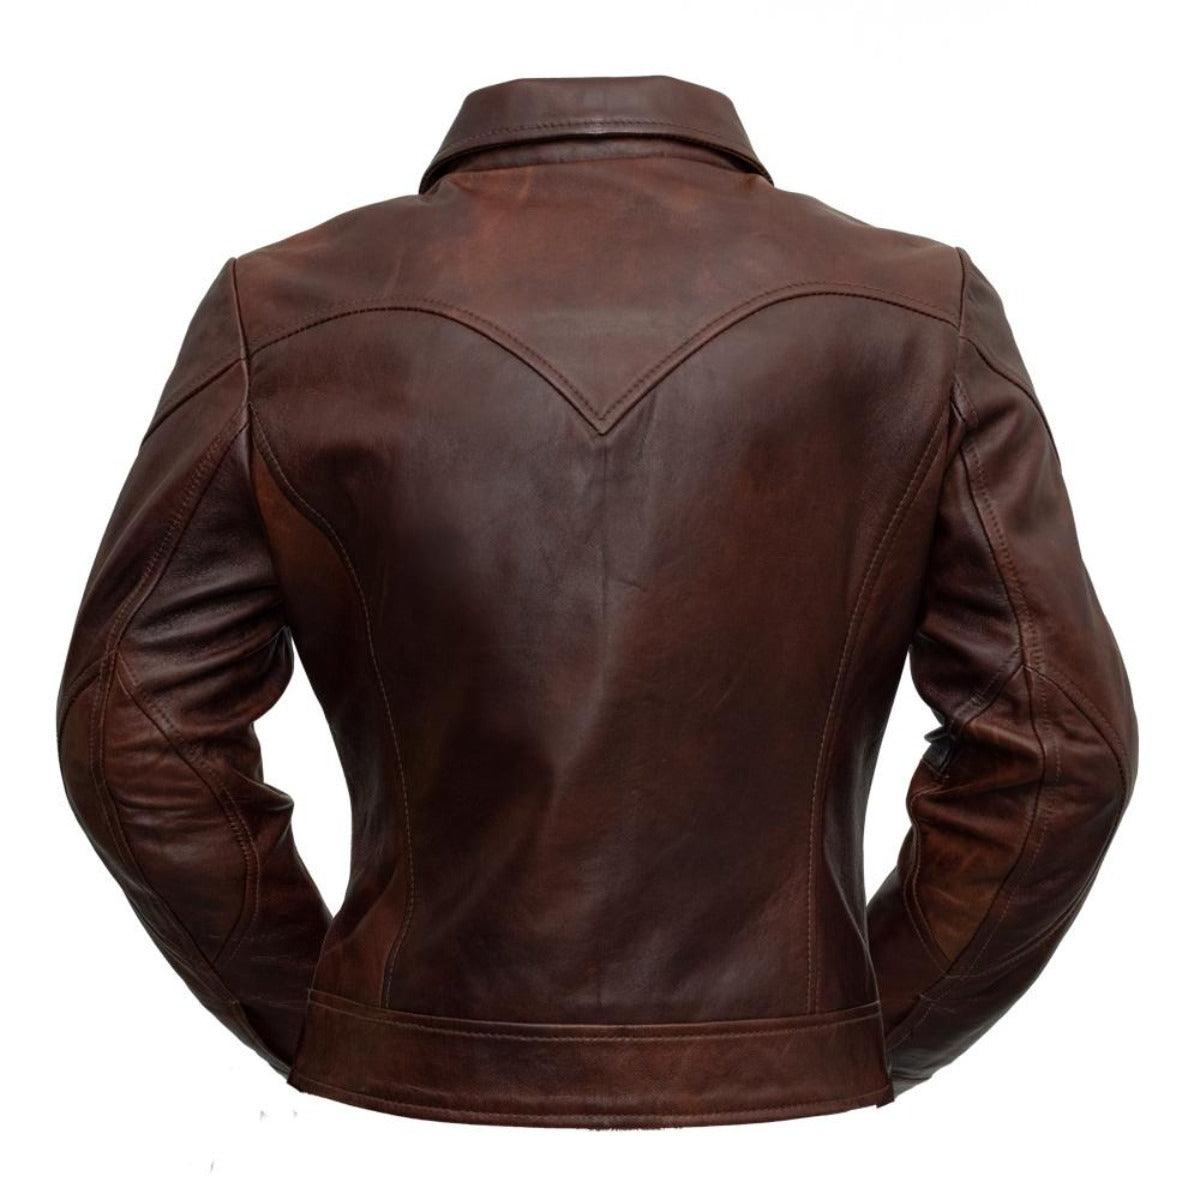 First Manufacturing Charlotte - Women's Lambskin Leather Jacket - American Legend Rider